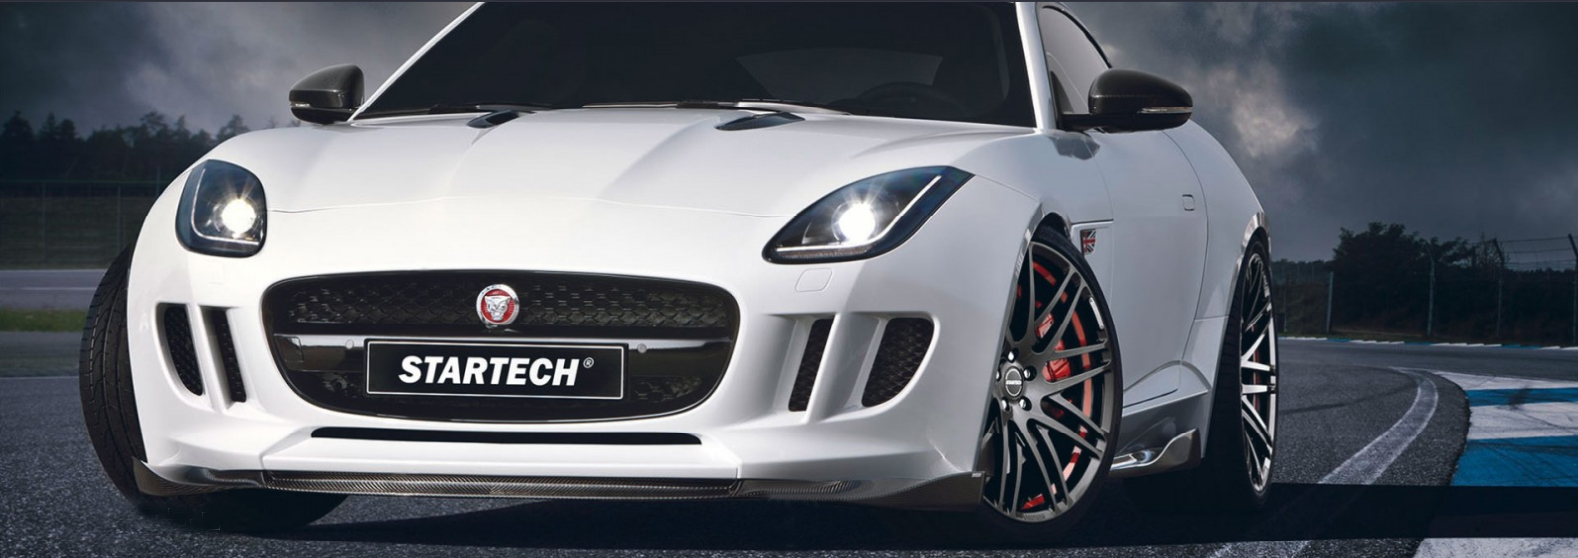 startech-ftype-front-main